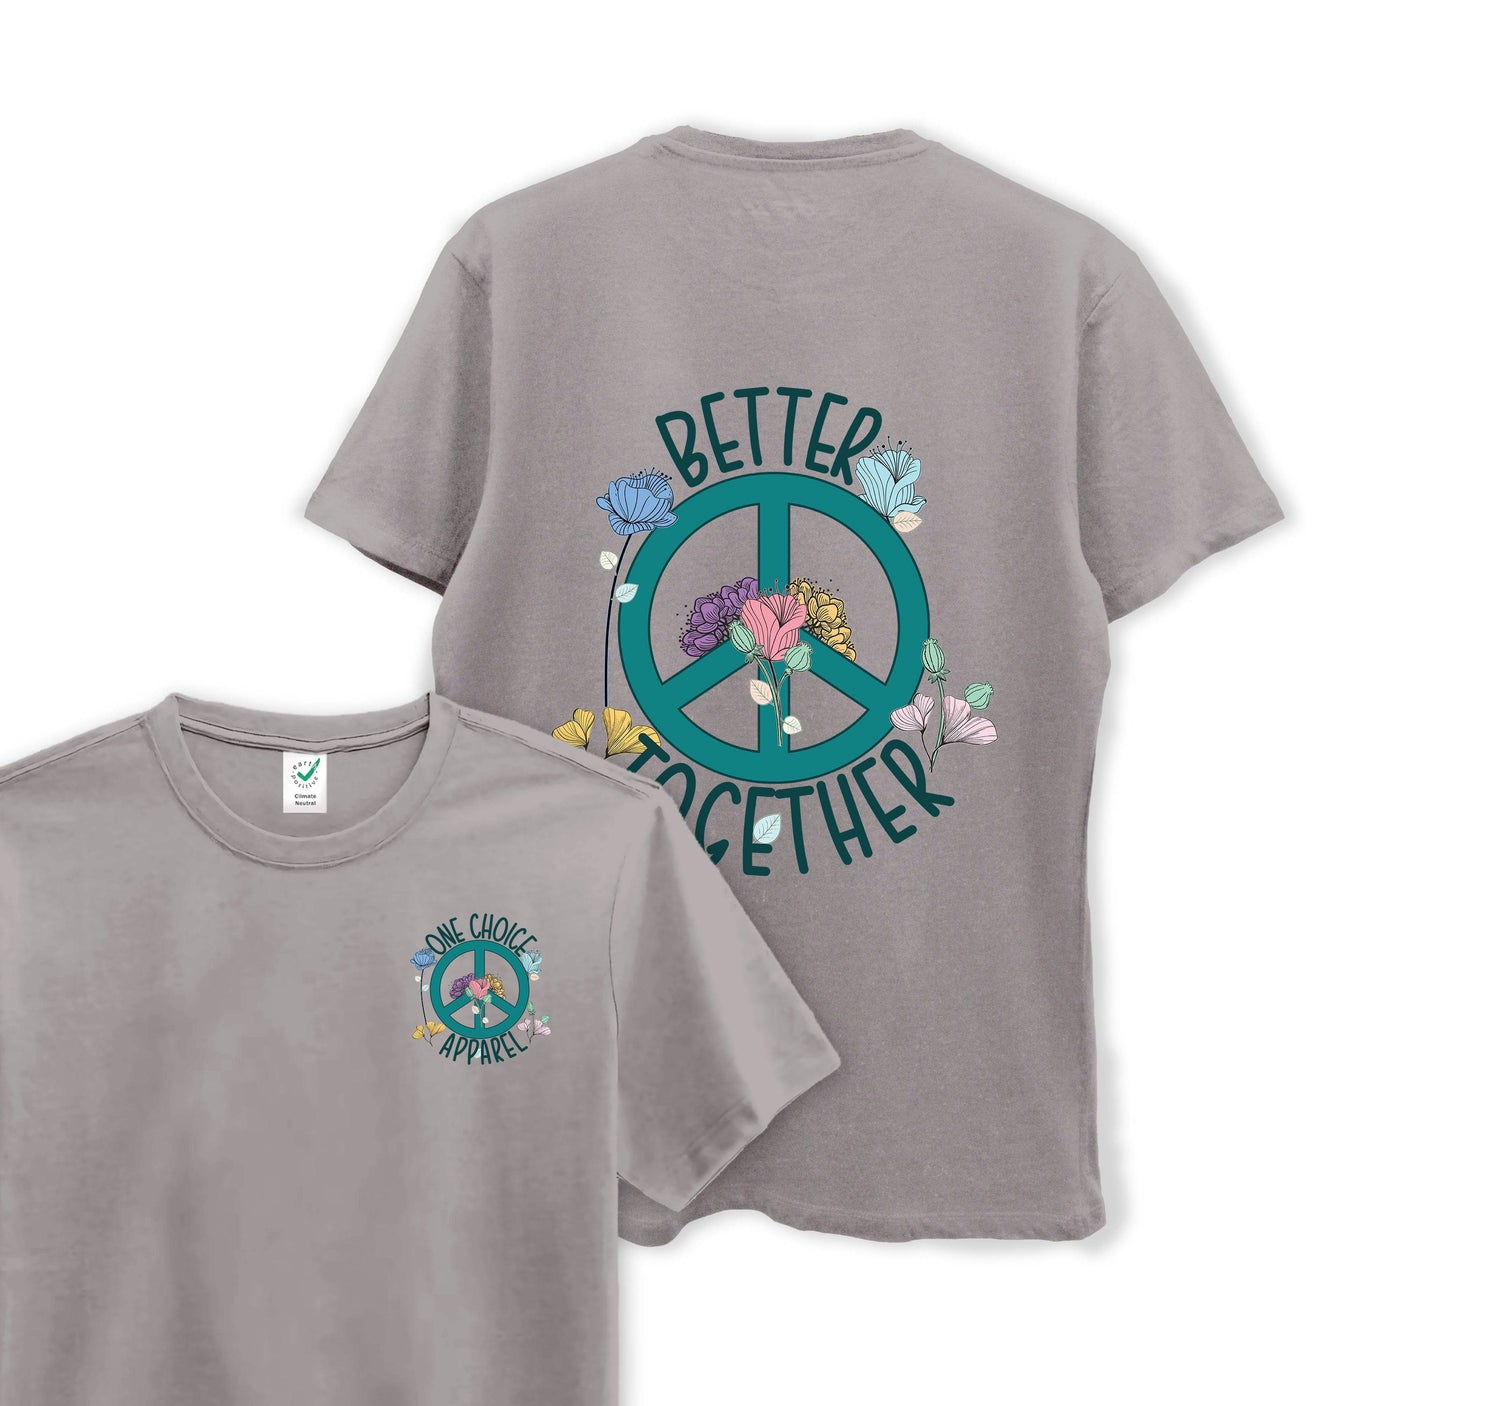 Better Together - Organic Cotton Tee - One Choice Apparel